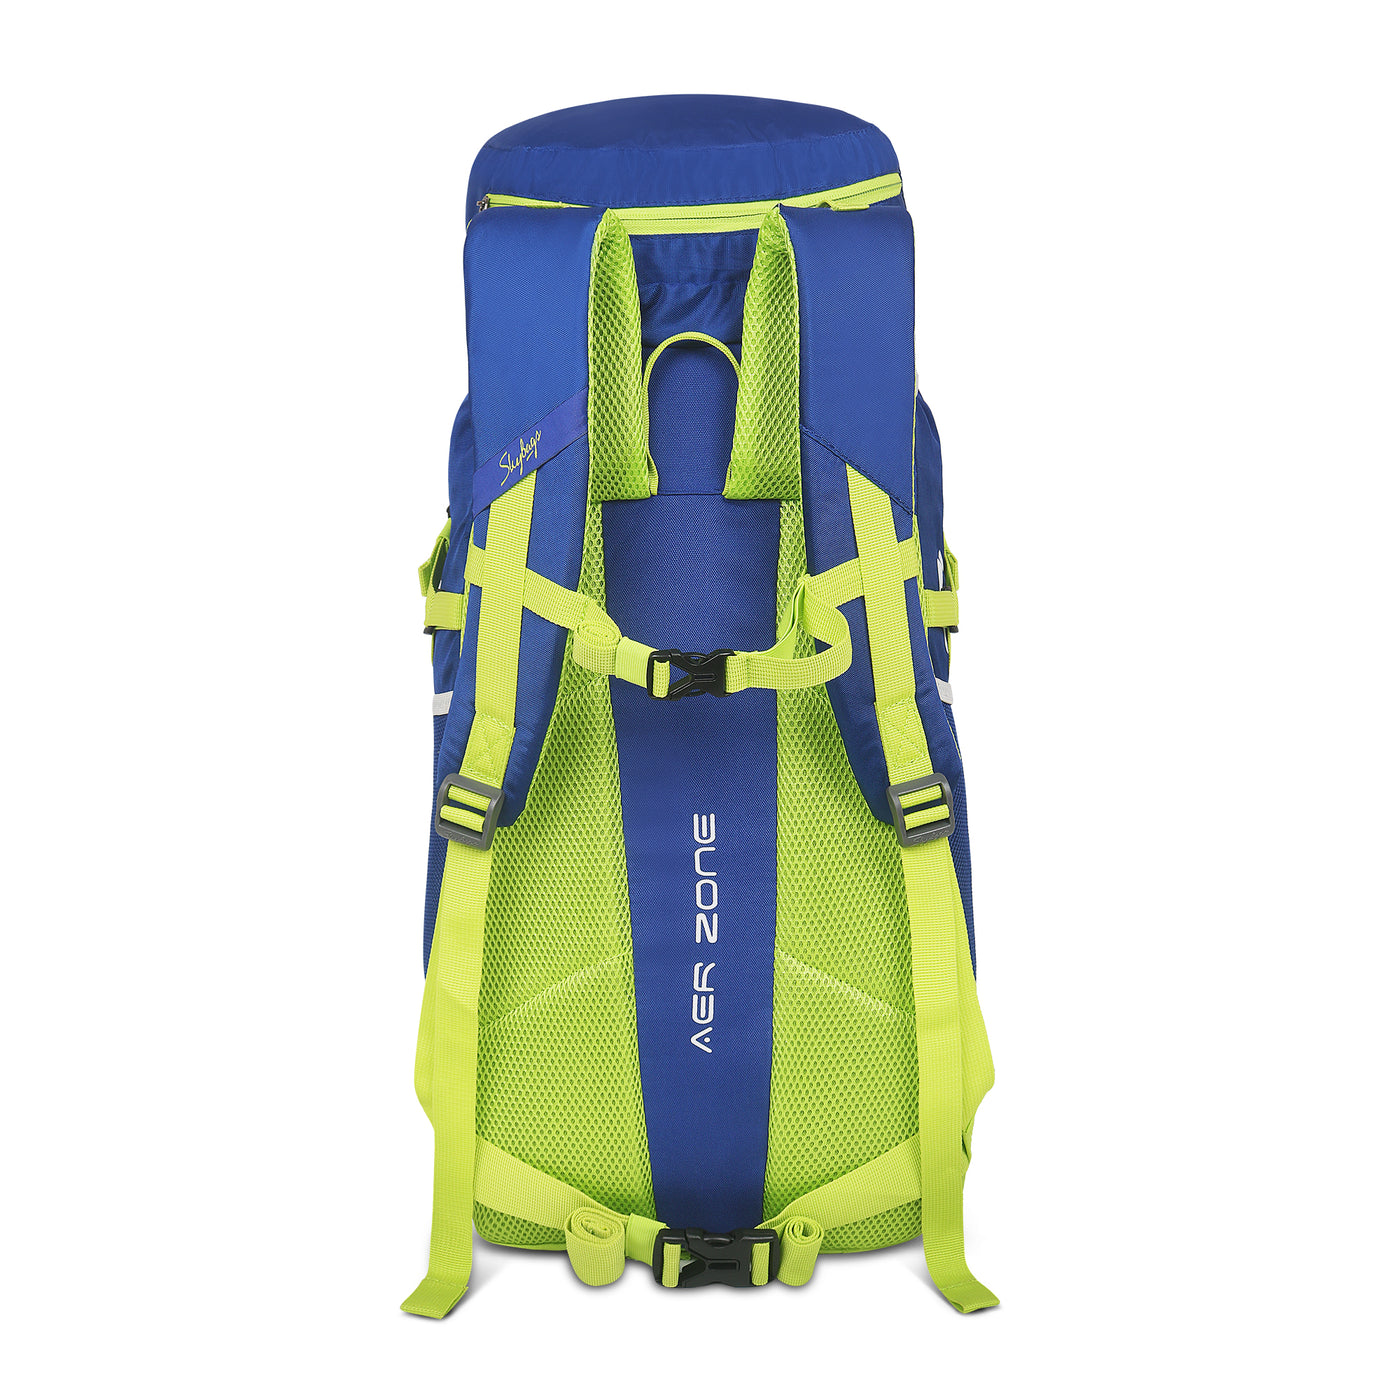 SKYBAGS MOUNT RUCKSACK 45L